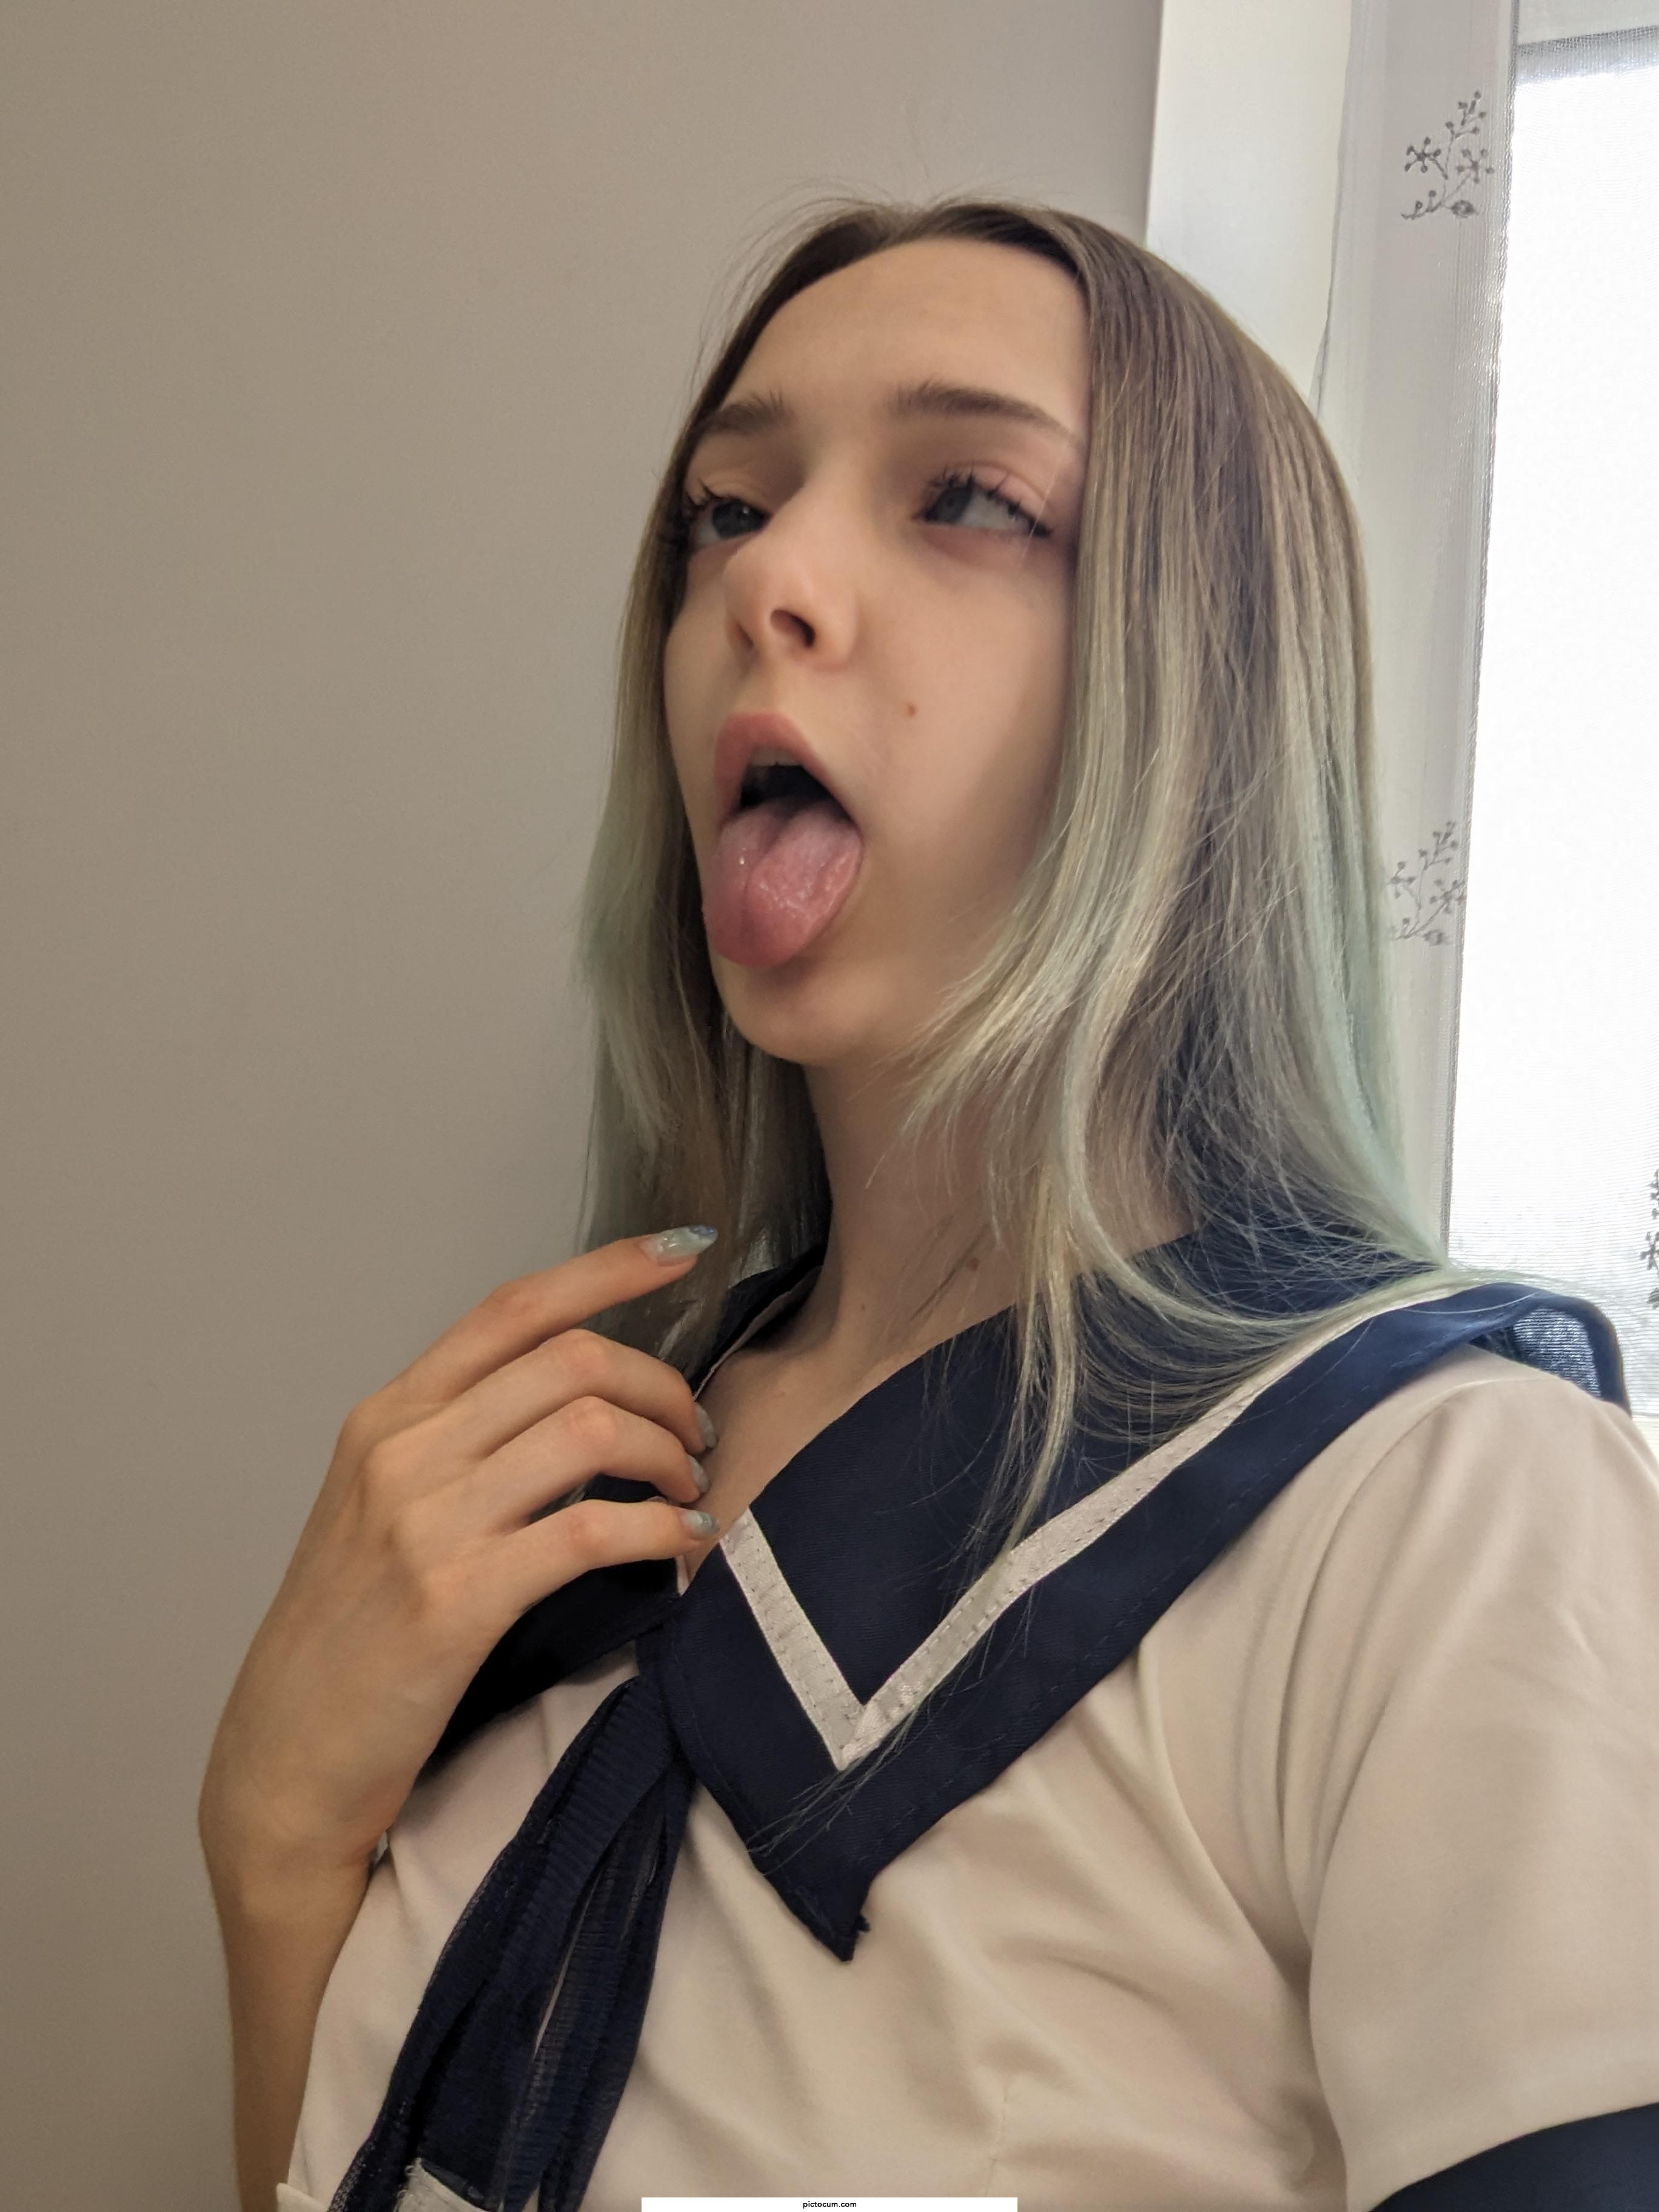 this ahegao is too cute, isn't it